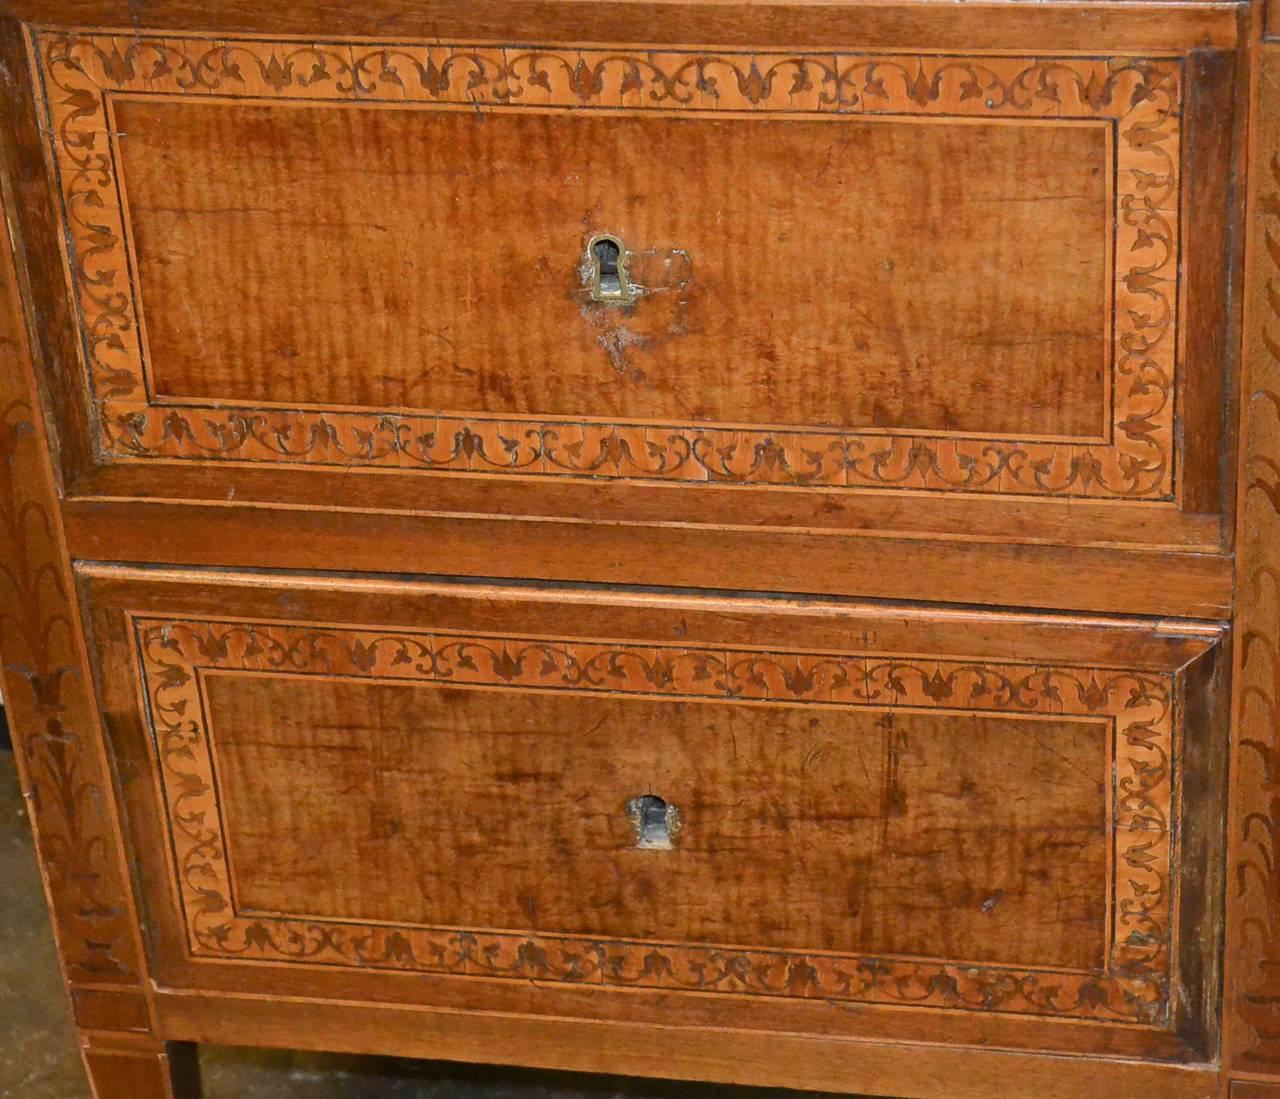 Lovely 18th century Italian inlaid two-drawer chest with Breche d'Alep marble top. Having wonderful detailed foliate inlays across drawers fronts and sides, resting on tapered legs, and exhibiting clean lines that work in countless styles of decor!